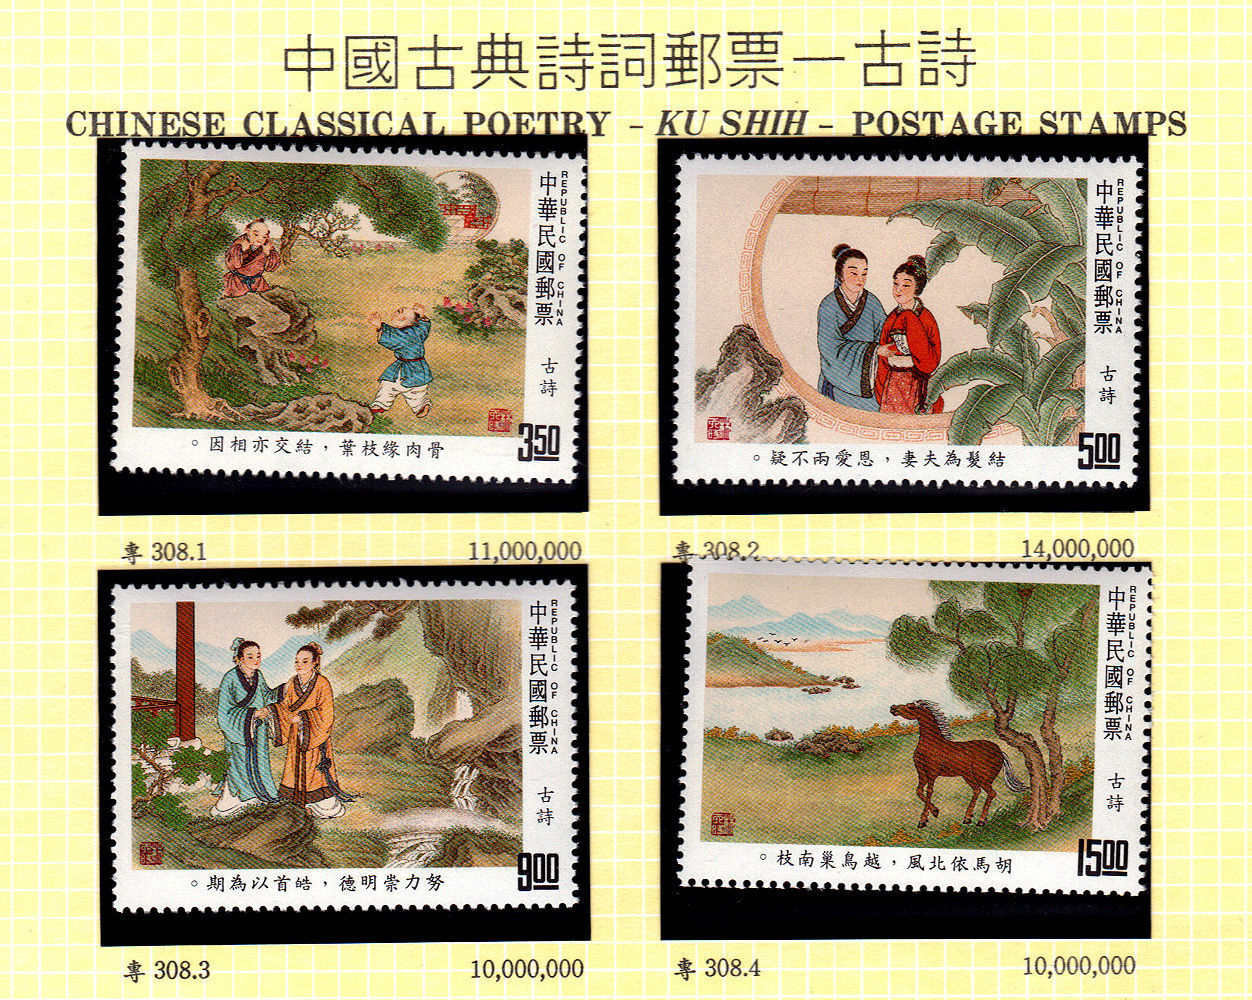 Taiwan R.O.C. Stamp *CHINESE CLASSICAL POETRY - OLD-STYLE VERSE* - New! - $17.95